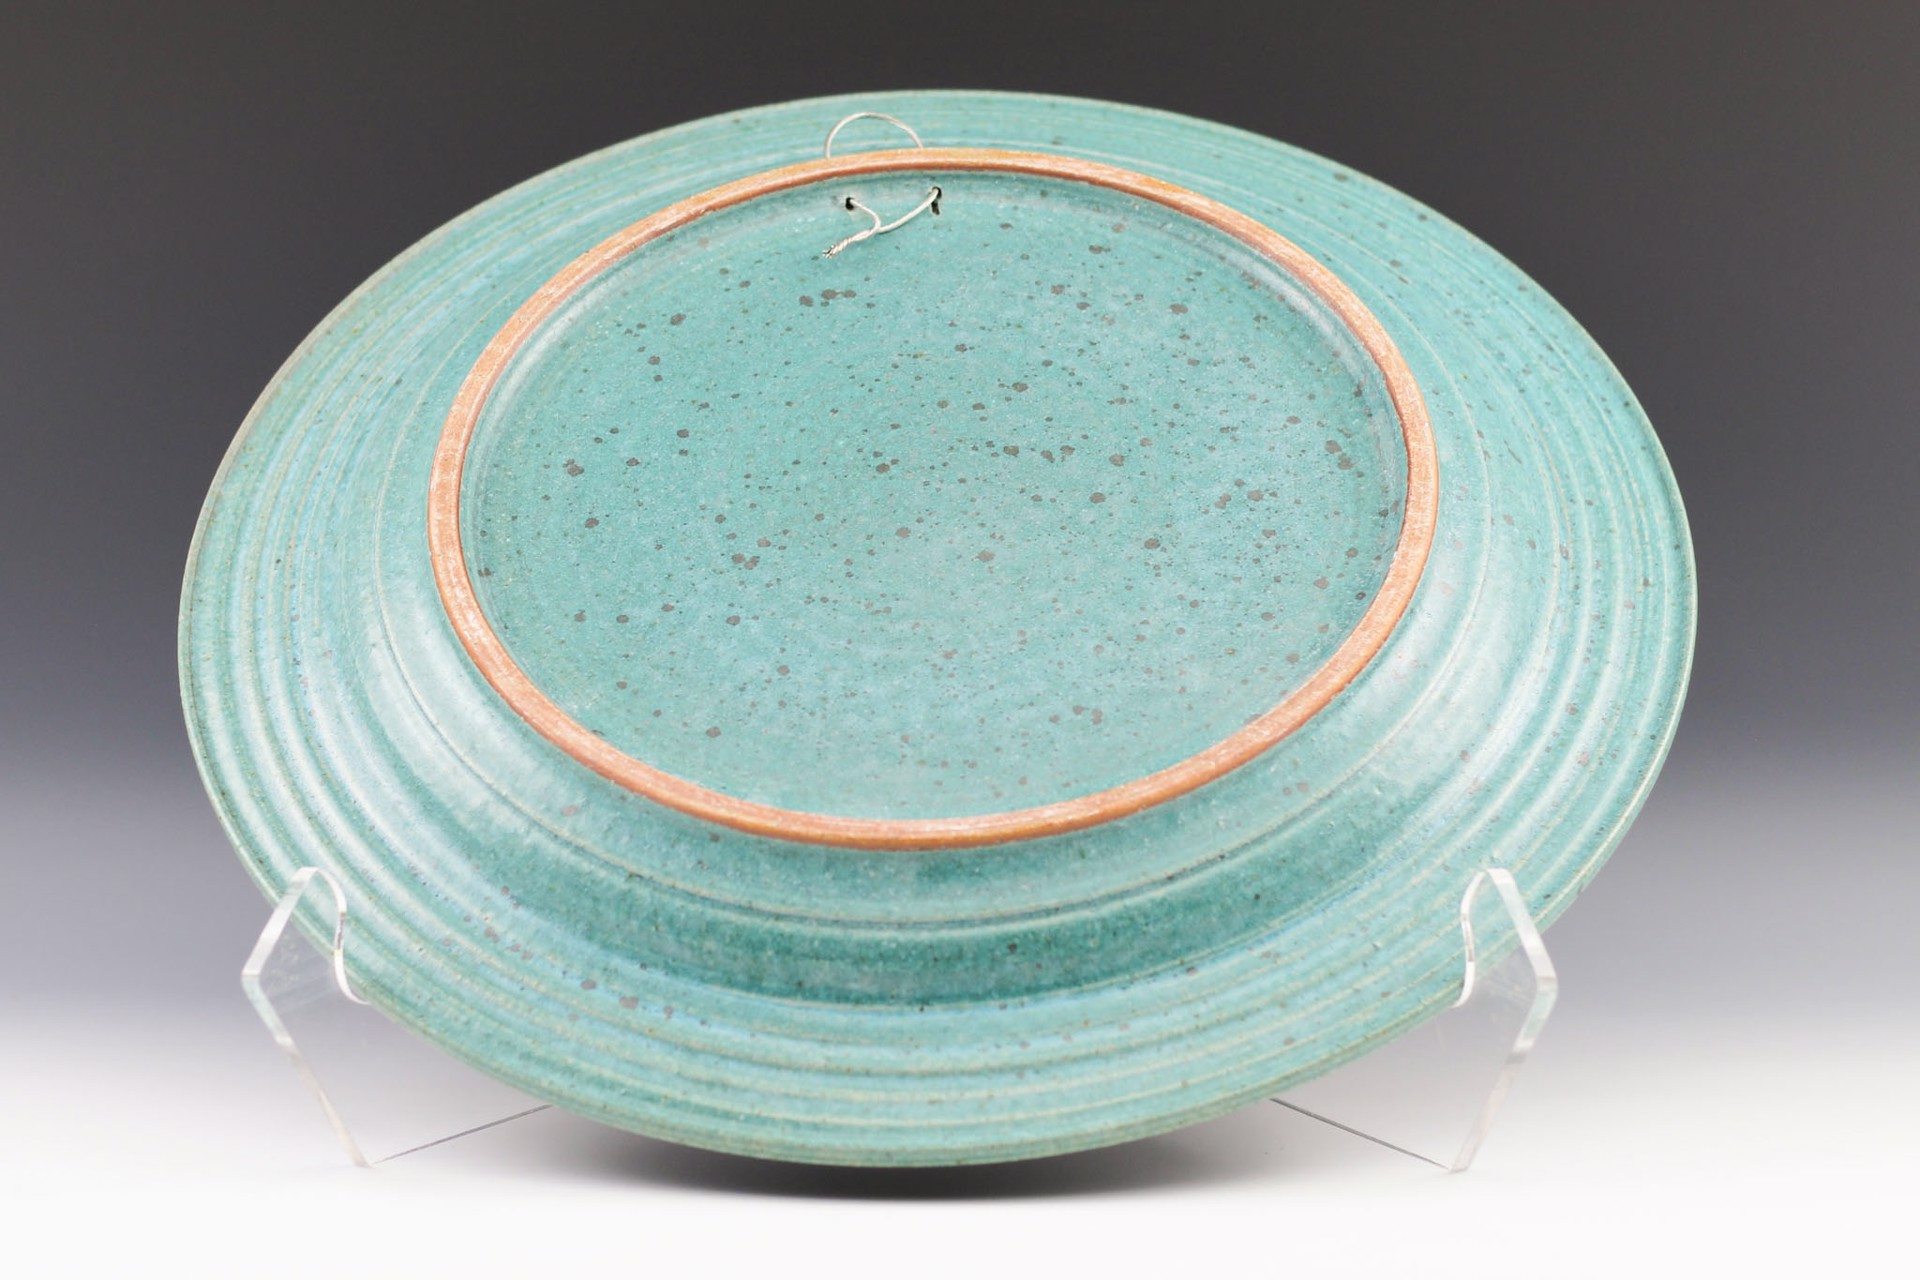 Turquoise and Black Platter by Winthrop Byers